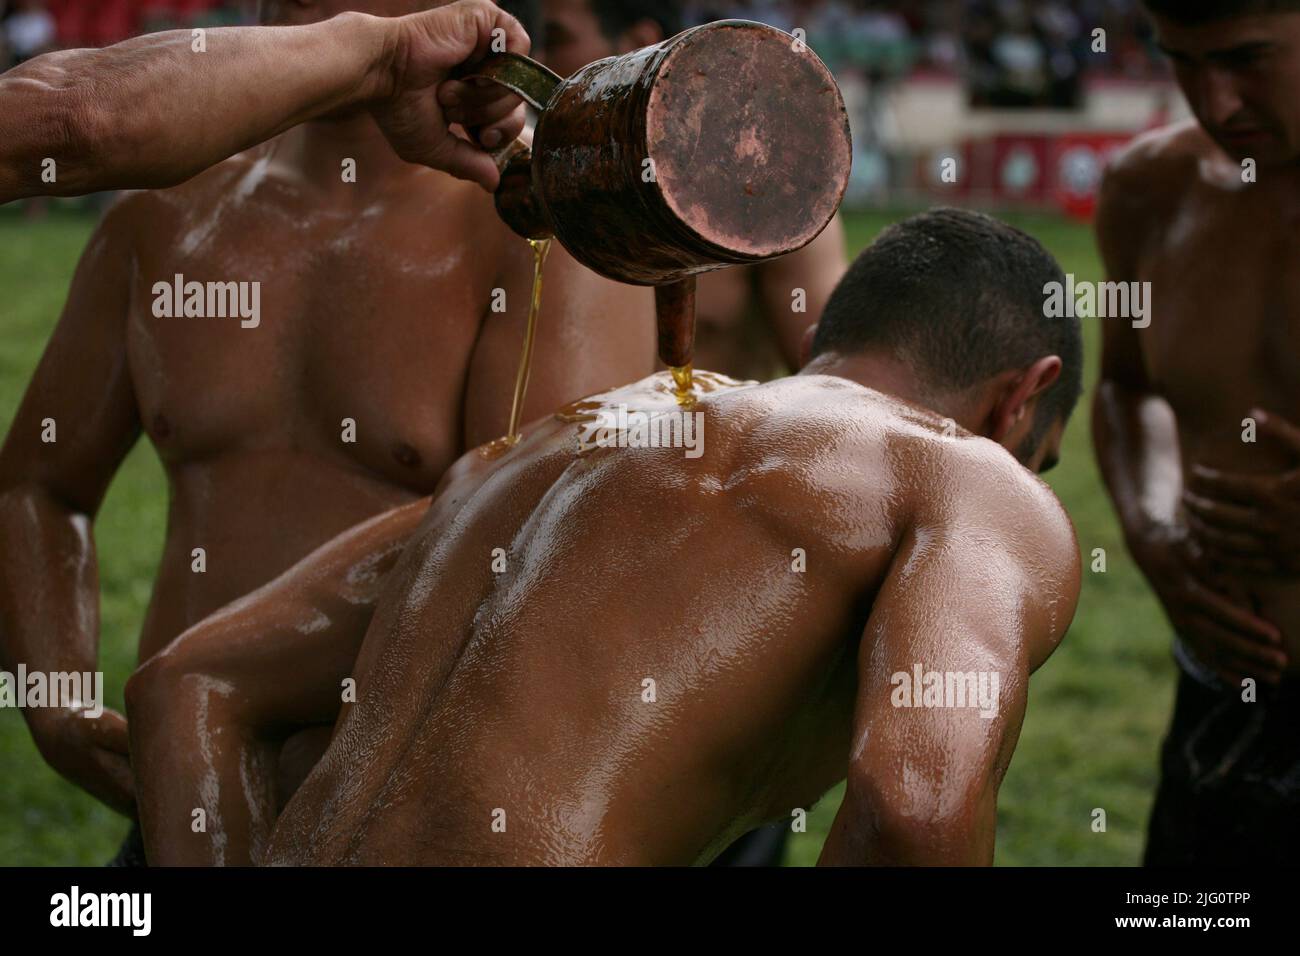 Kırkpınar (Turkish Oil Wrestling). Tournament staff member pours olive oil on the wrestler to prepare him for fighting during the 648th Kırkpınar Tournament in Edirne, Turkey, on 4 July 2009. Kırkpınar wrestlers compete stripped to the waist and smeared their bodies with olive oil. About three tons of olive oil is used each year during the Kırkpınar Tournament. Stock Photo